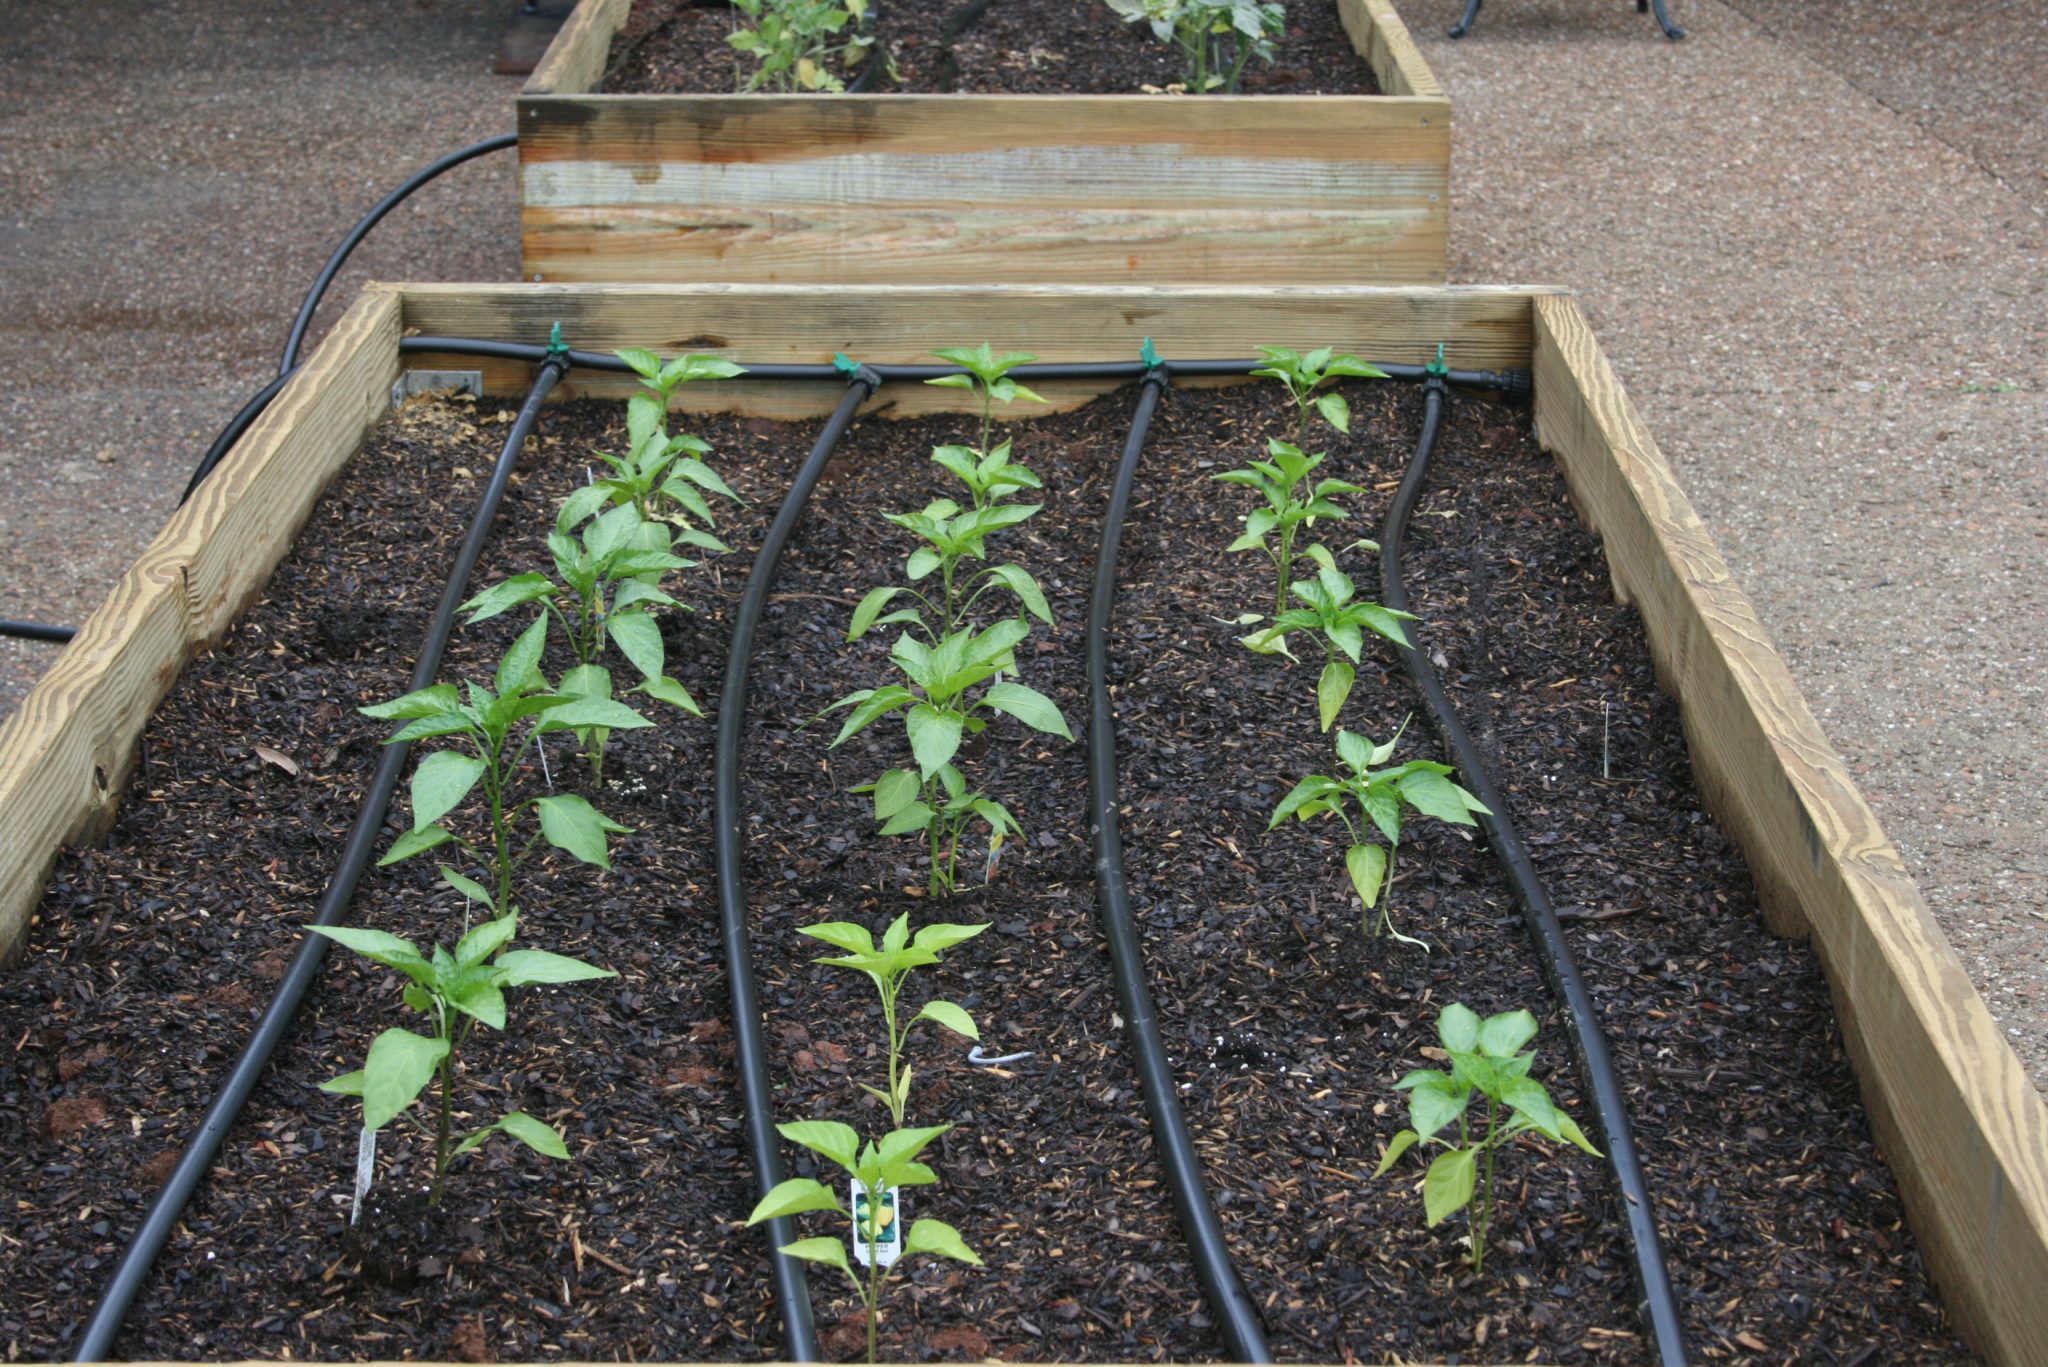 Irrigation in a raised bed